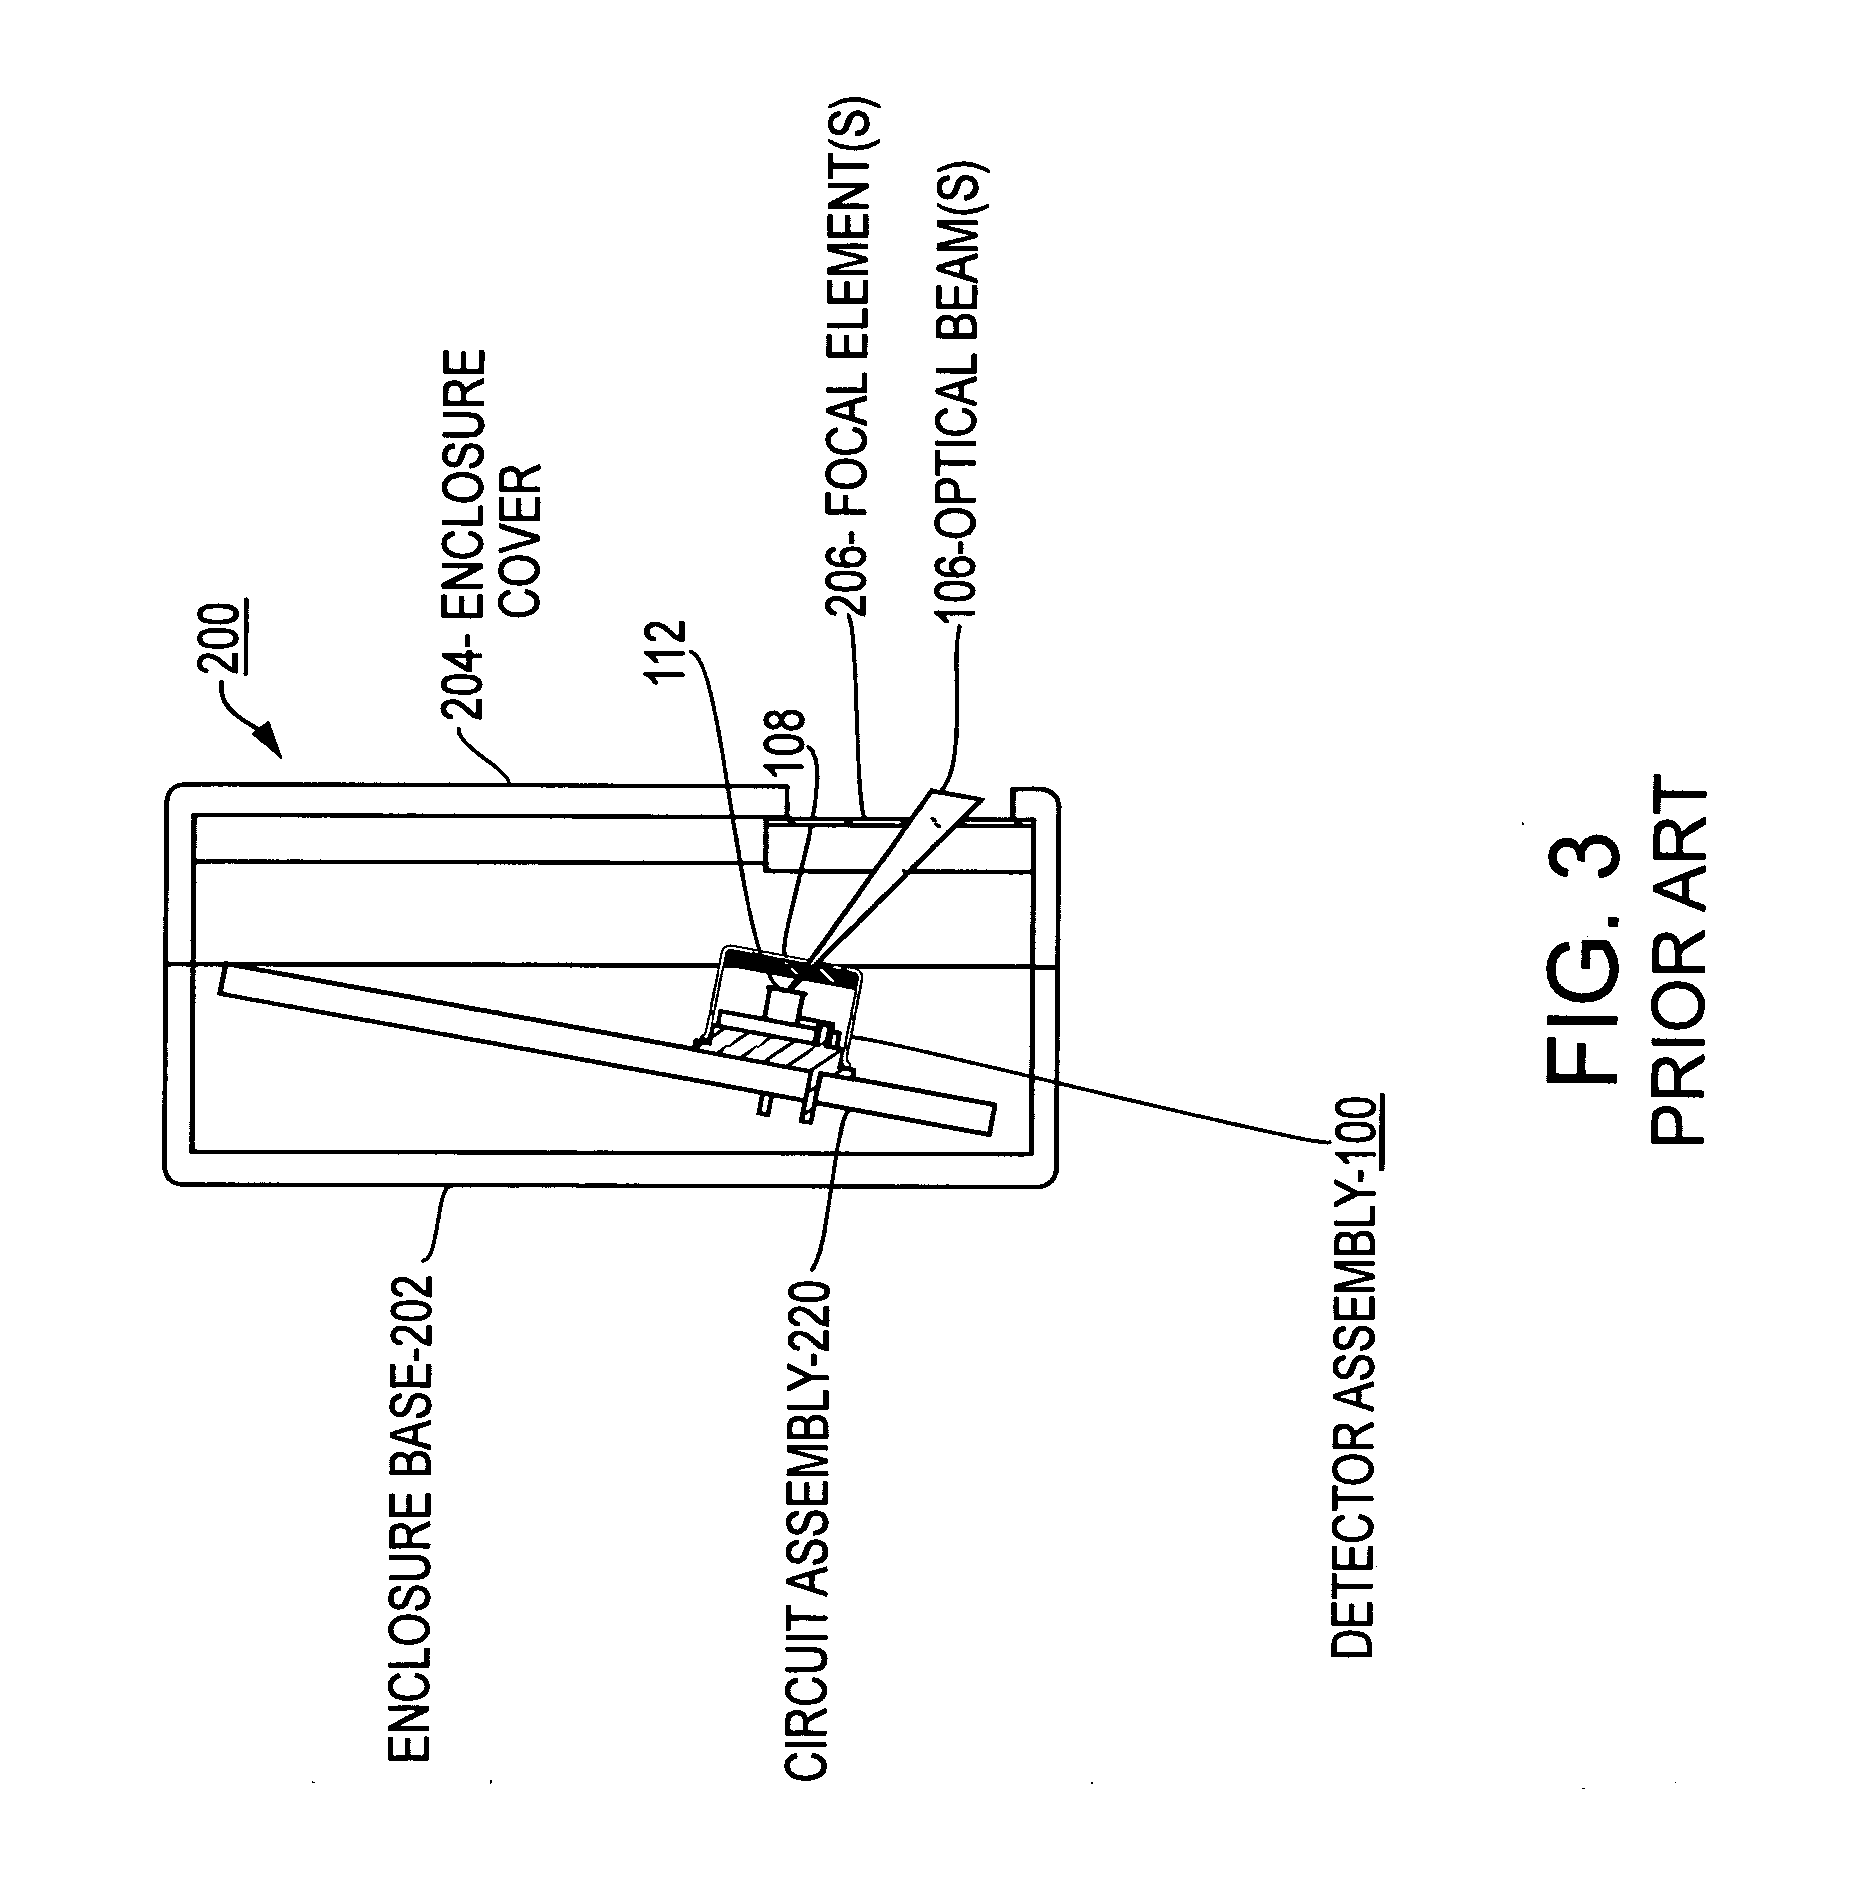 MEMS based space safety infrared sensor apparatus and method for detecting a gas or vapor